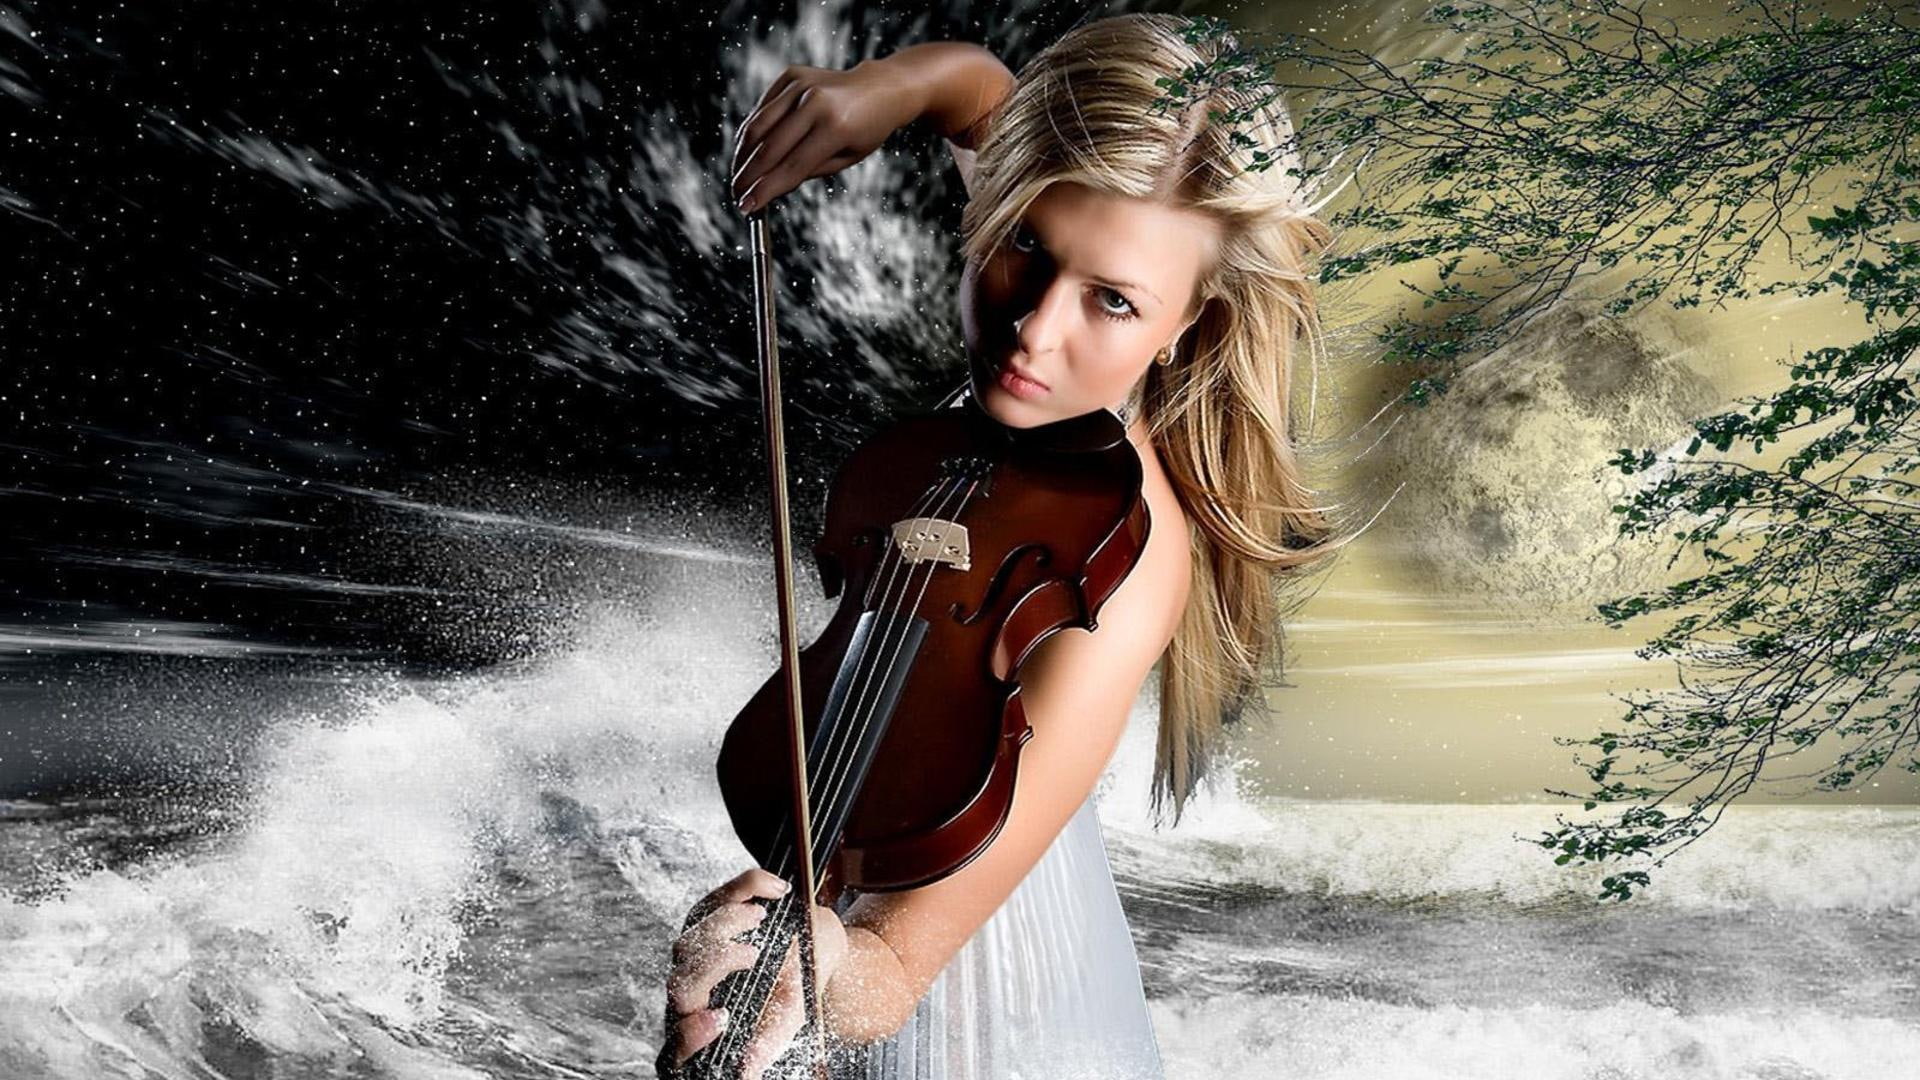 Passion For Music, brown wooden violin, nature, girl, fantasy